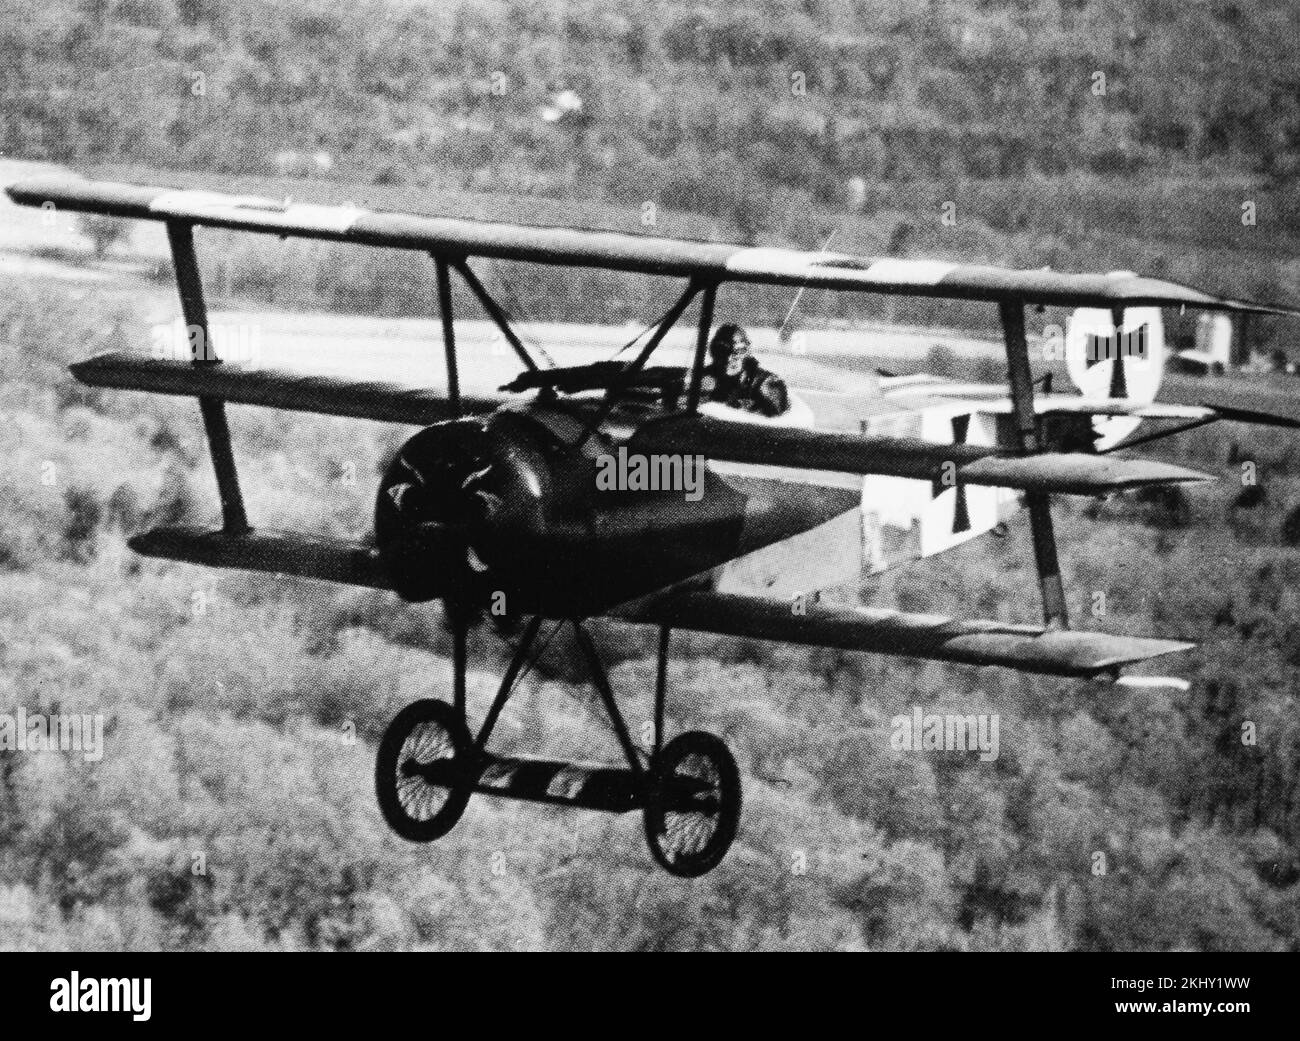 A vintage black and white photograph showing a Fokker DR.1 Triplane of the German Air Force Luftwaffe in flight. Stock Photo